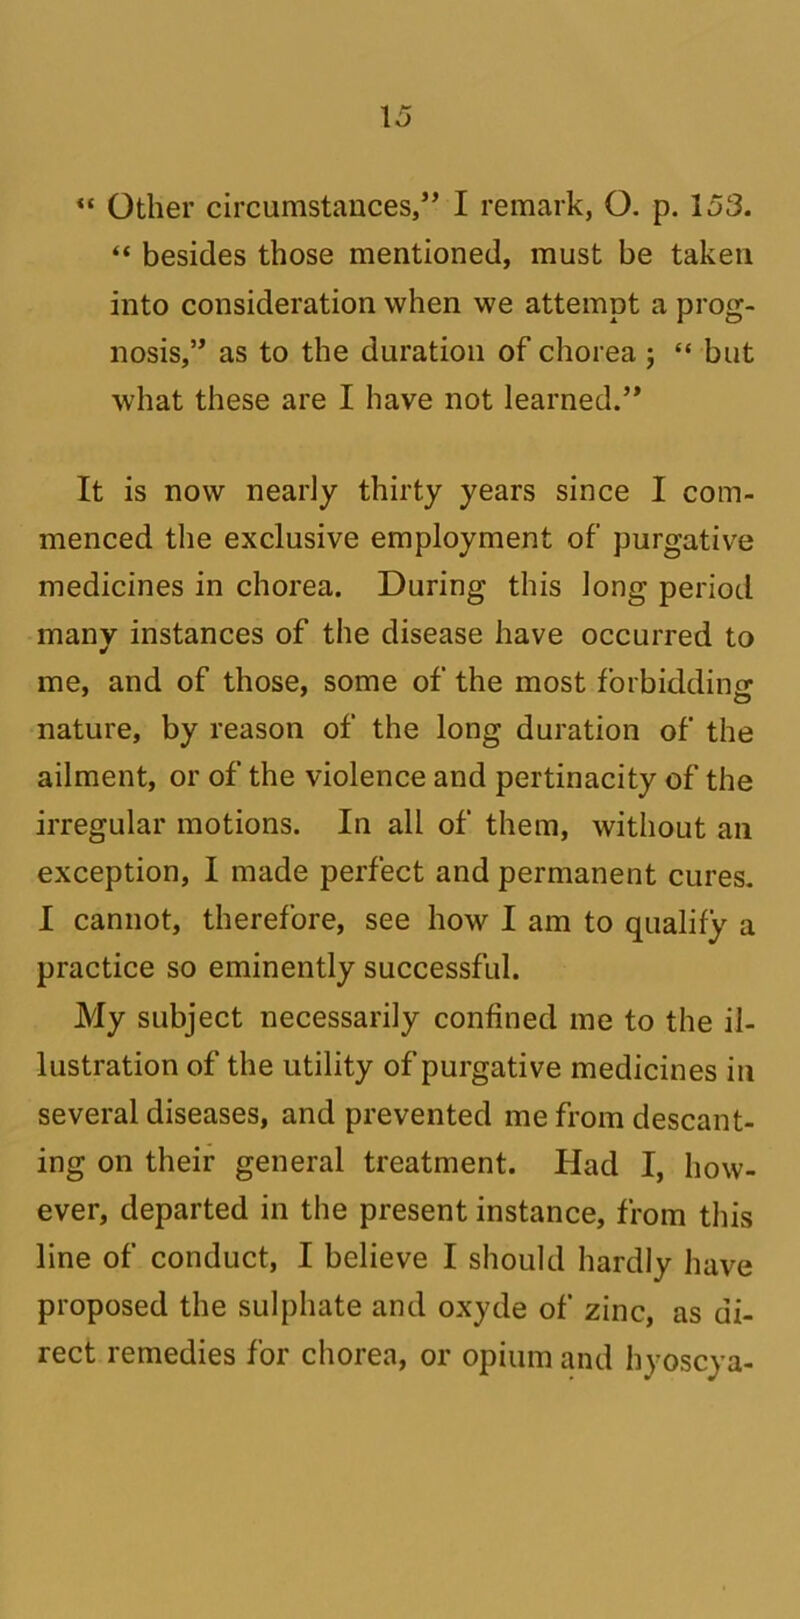 “ Other circumstances/’ I remark, O. p. 153. “ besides those mentioned, must be taken into consideration when we attempt a prog- nosis,” as to the duration of chorea; “ but what these are I have not learned.” It is now nearly thirty years since I com- menced the exclusive employment of purgative medicines in chorea. During this long period many instances of the disease have occurred to me, and of those, some of the most forbidding nature, by reason of the long duration of the ailment, or of the violence and pertinacity of the irregular motions. In all of them, without an exception, I made perfect and permanent cures. I cannot, therefore, see how I am to qualify a practice so eminently successful. My subject necessarily confined me to the il- lustration of the utility of purgative medicines in several diseases, and prevented me from descant- ing on their general treatment. Had I, how- ever, departed in the present instance, from this line of conduct, I believe I should hardly have proposed the sulphate and oxyde of zinc, as di- rect remedies for chorea, or opium and hyoscya-